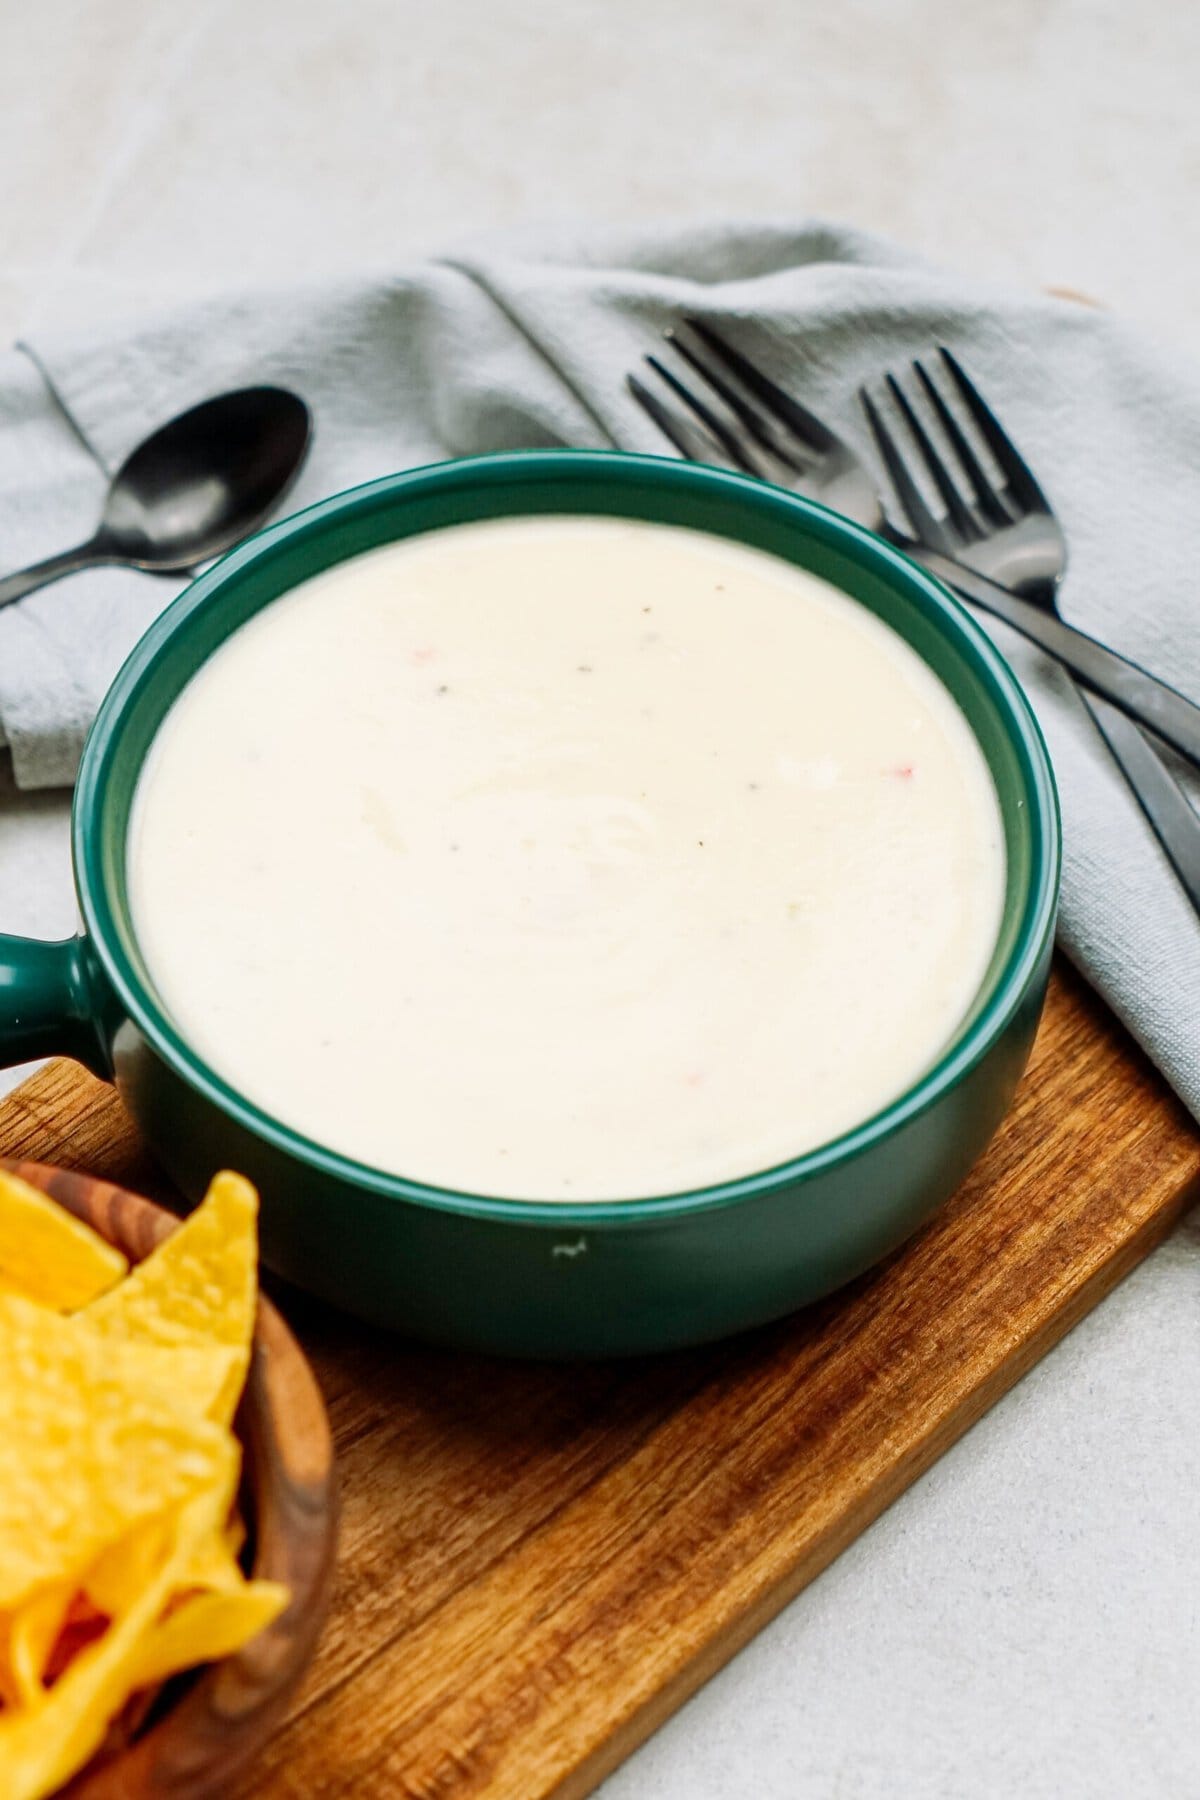 A bowl of creamy white queso dip on a wooden board next to a small bowl of tortilla chips. Silverware and a gray cloth napkin are placed in the background.